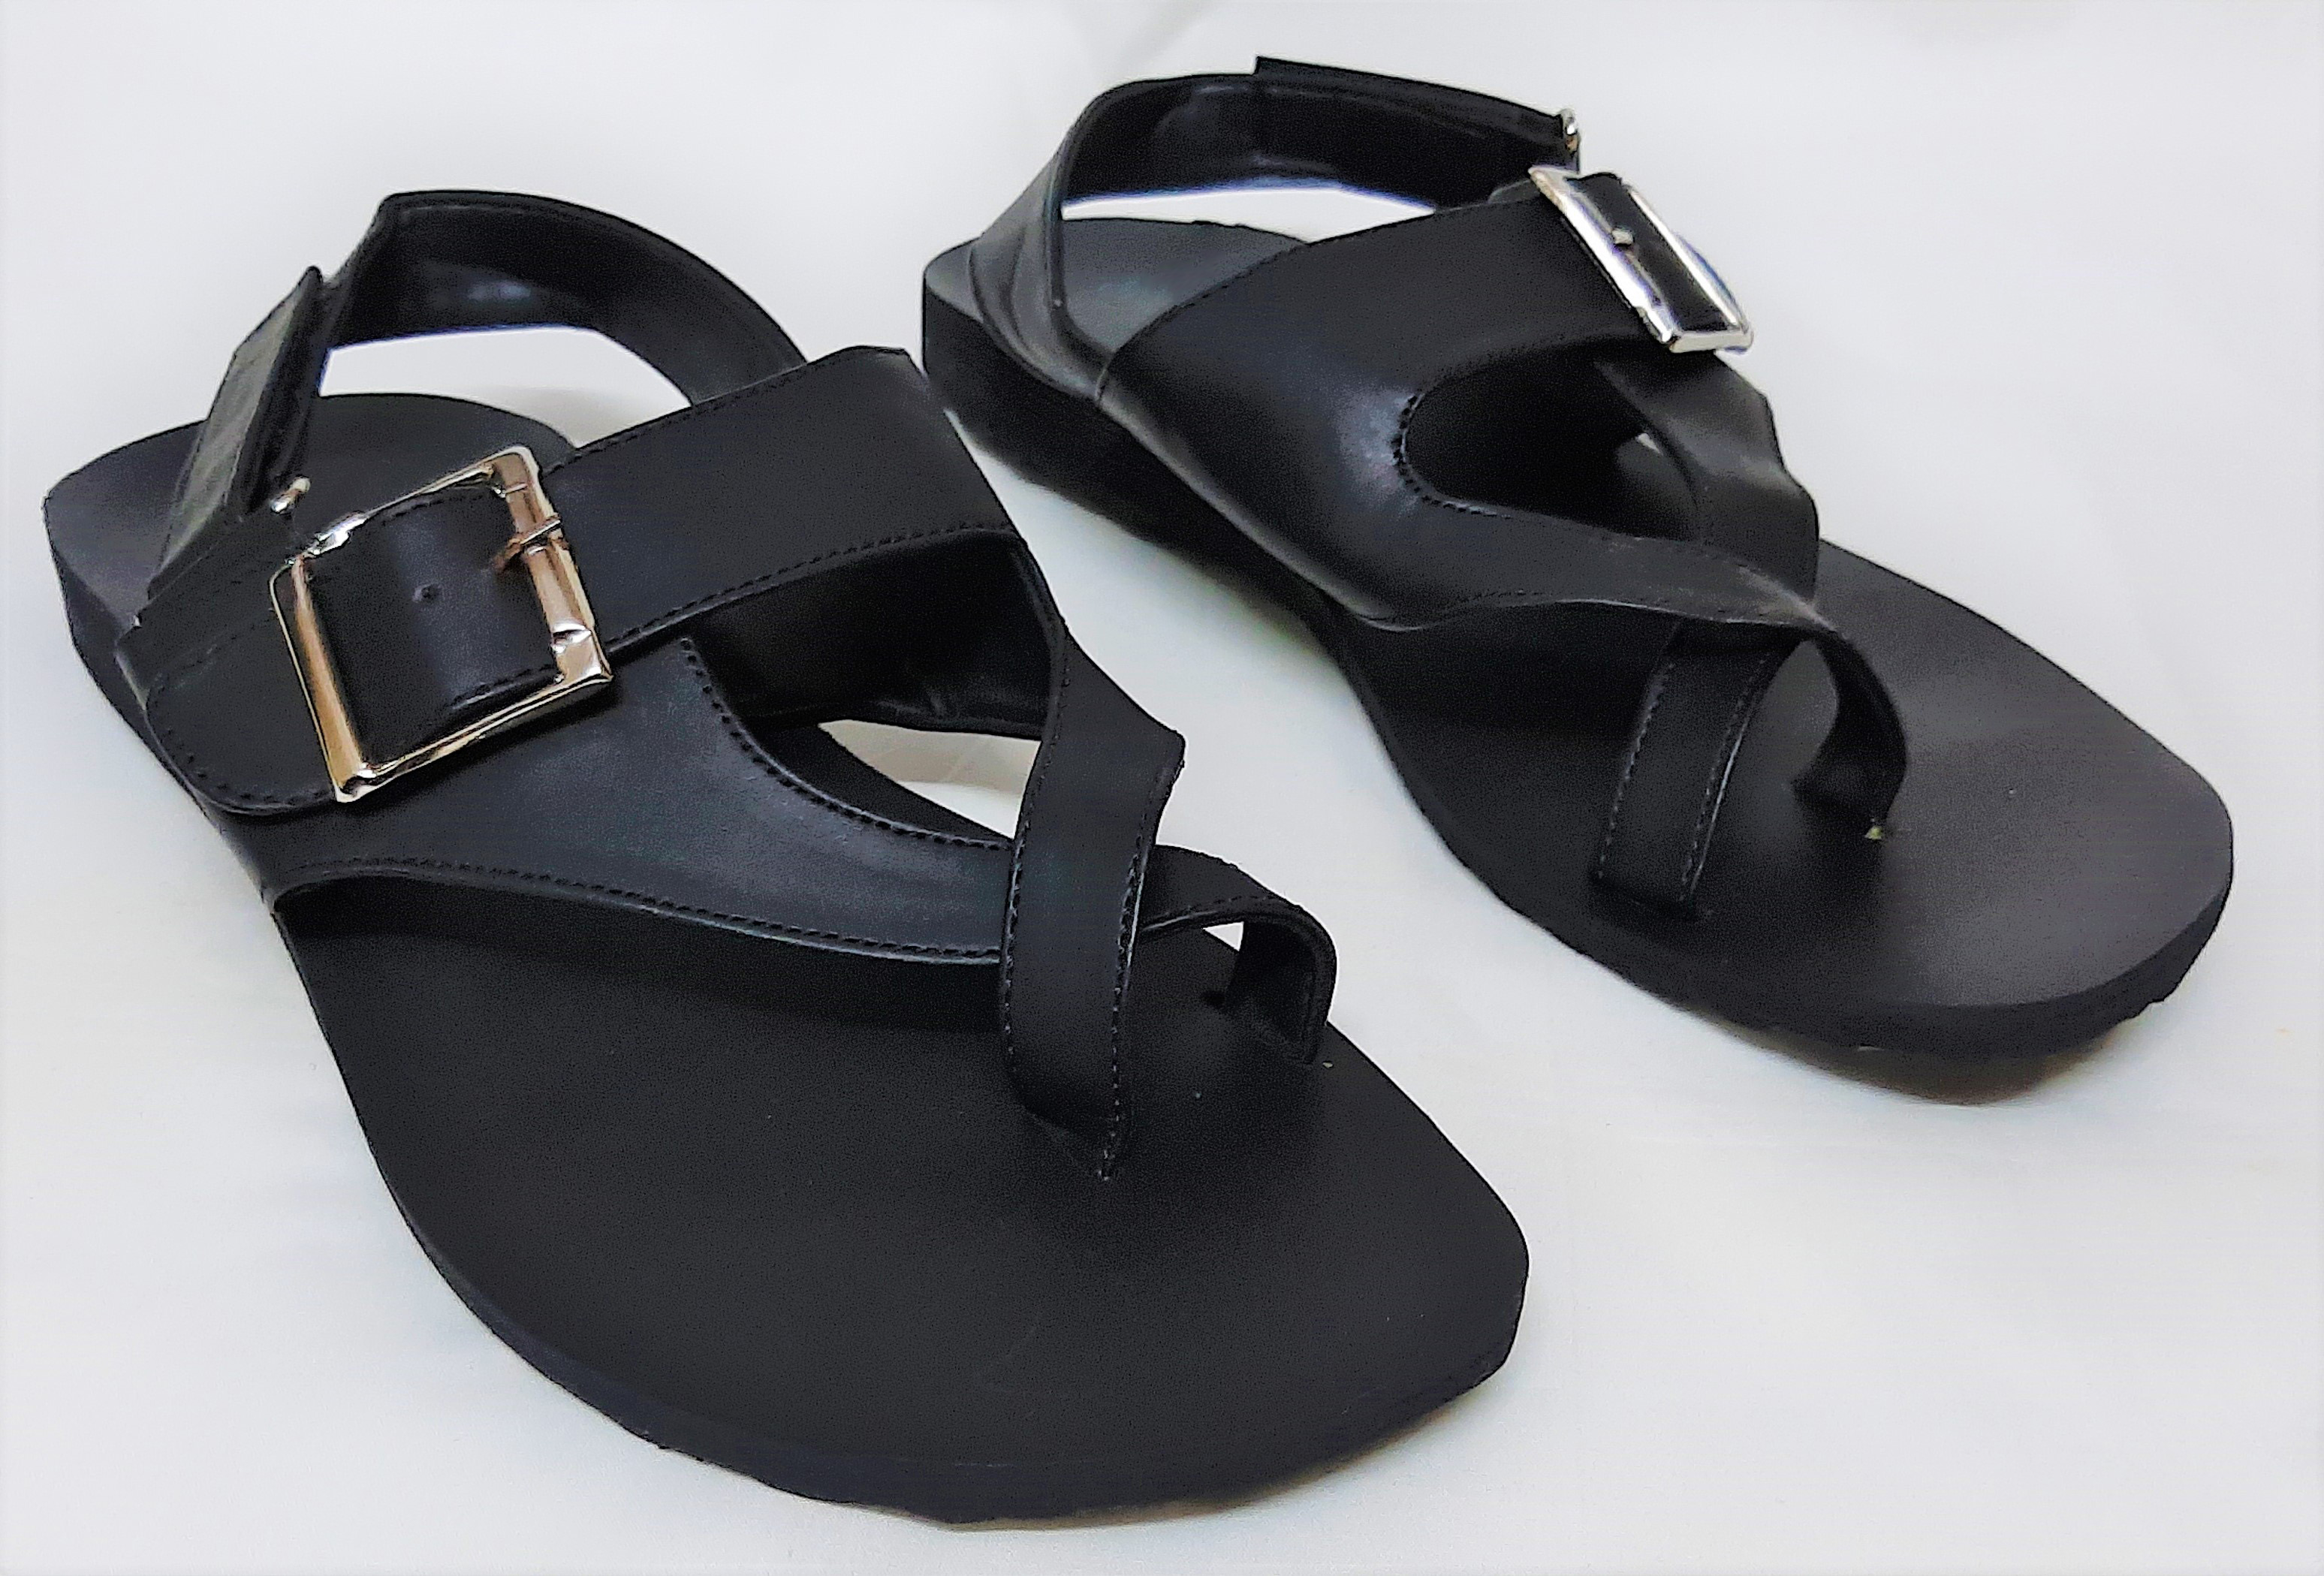 Buy Leather Chappal Black Buckle G Online @ ₹699 from ShopClues